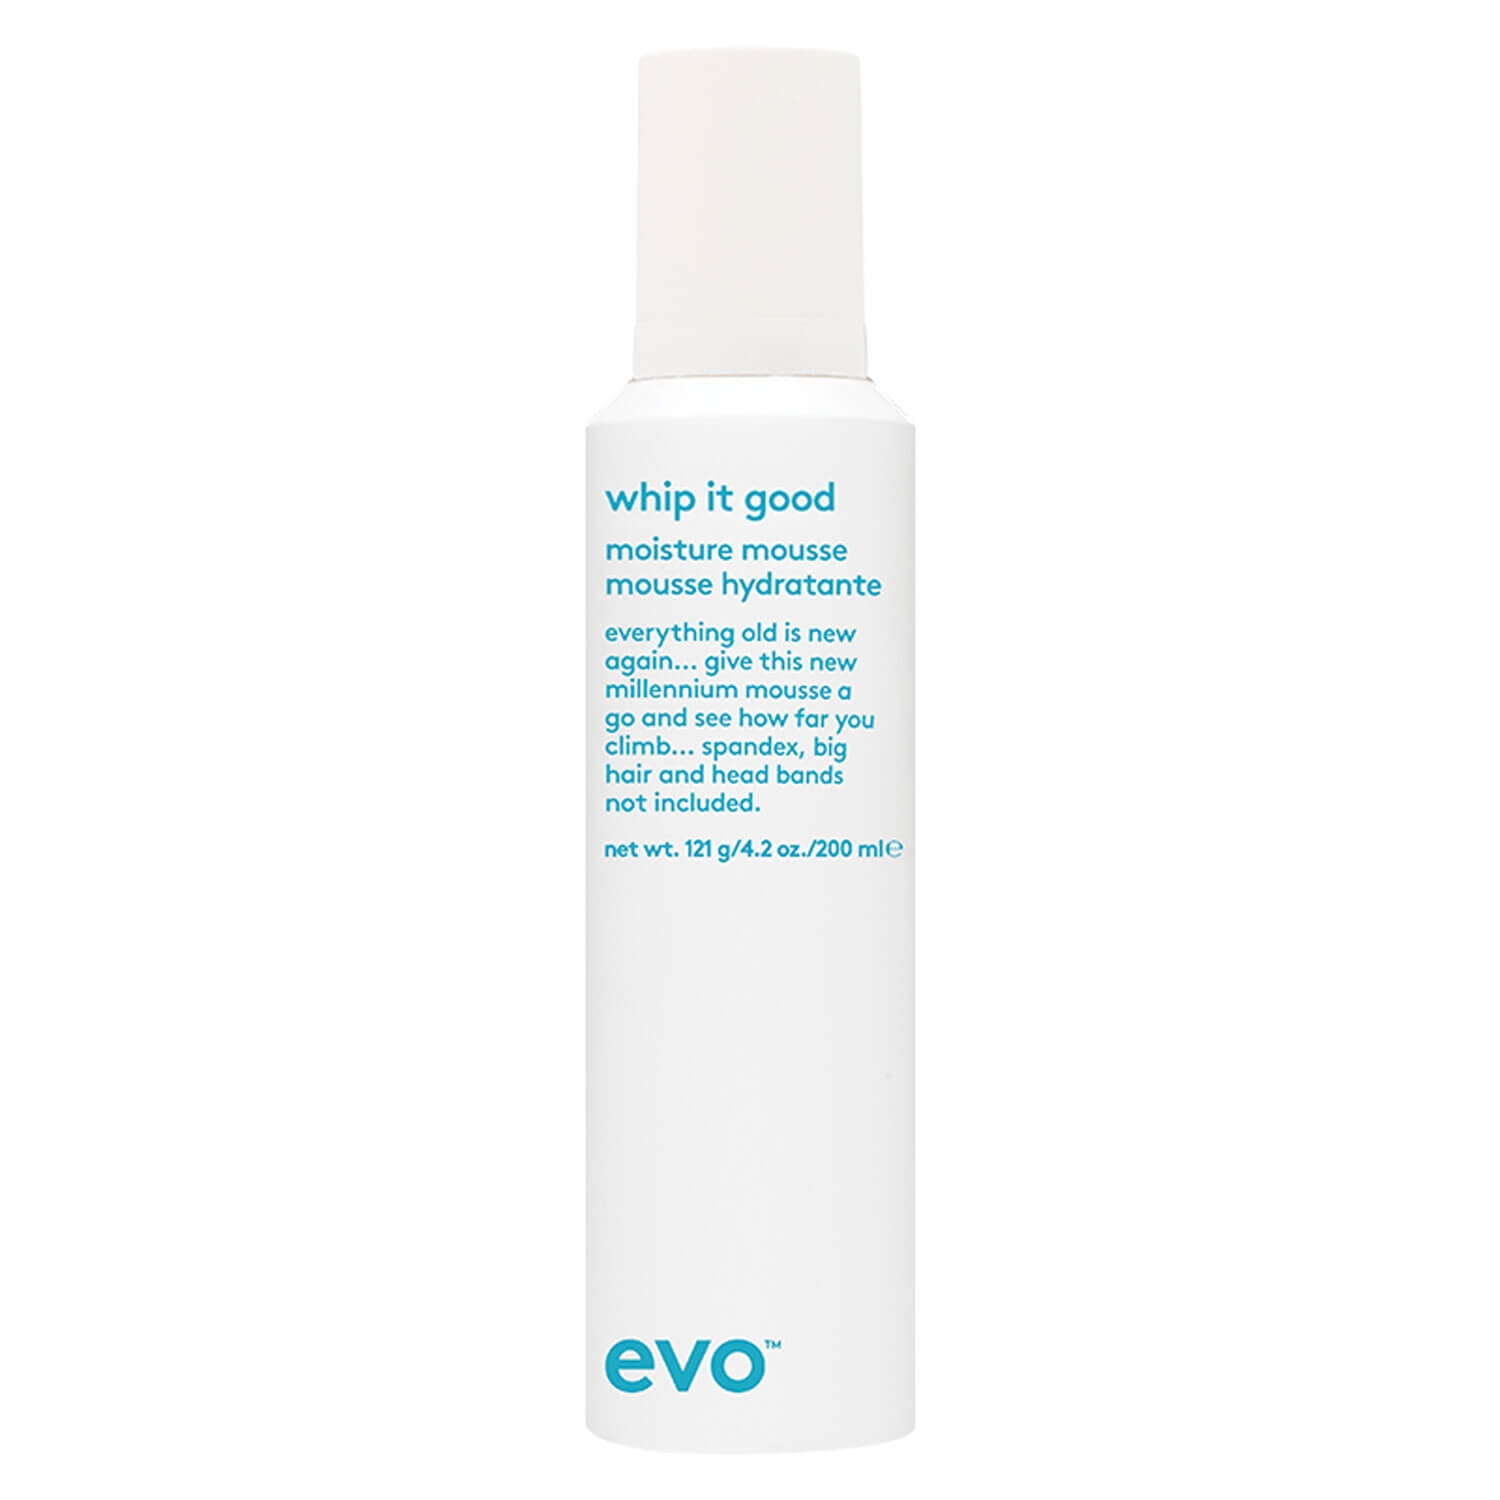 Product image from evo curl - whip it good moisture mousse